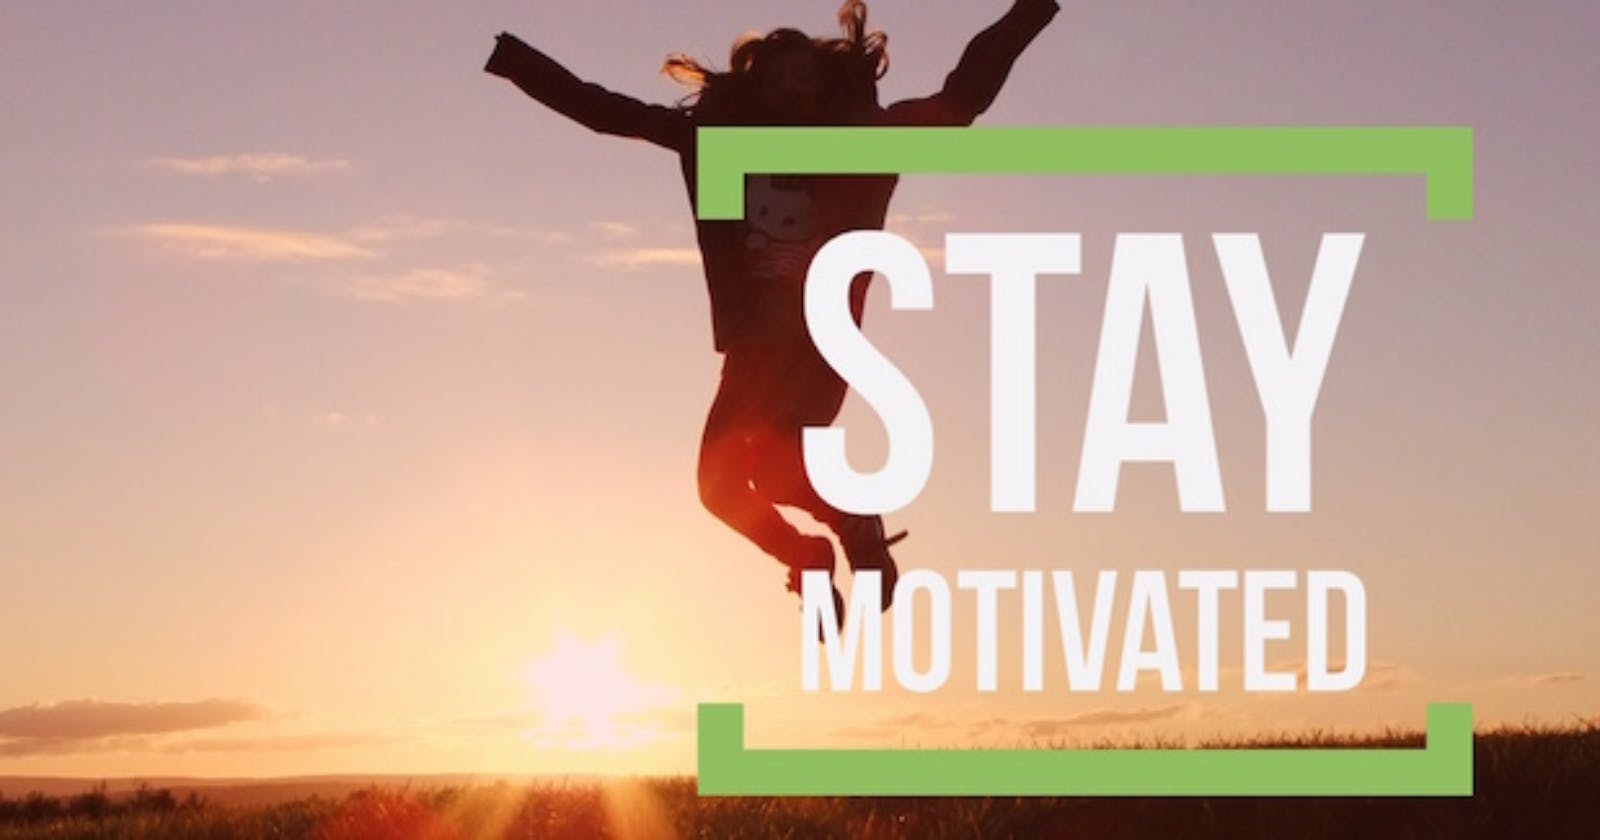 Staying Motivated During Difficult Times